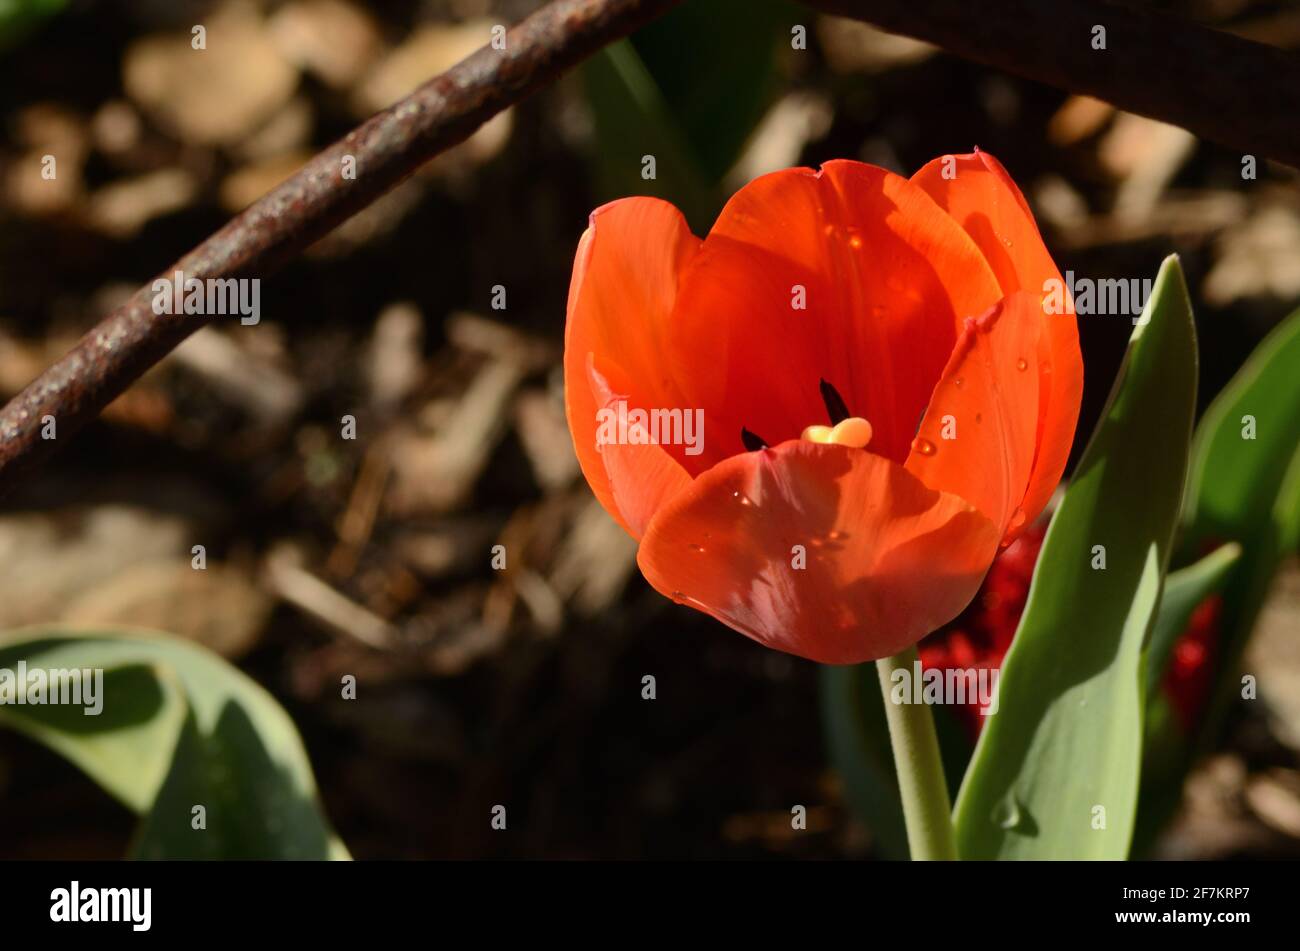 Single close-up of vivid reddish orange tulip blossom shining in the morning light. Lines and patterns attracts attention 2 this bloom beauty.. Stock Photo